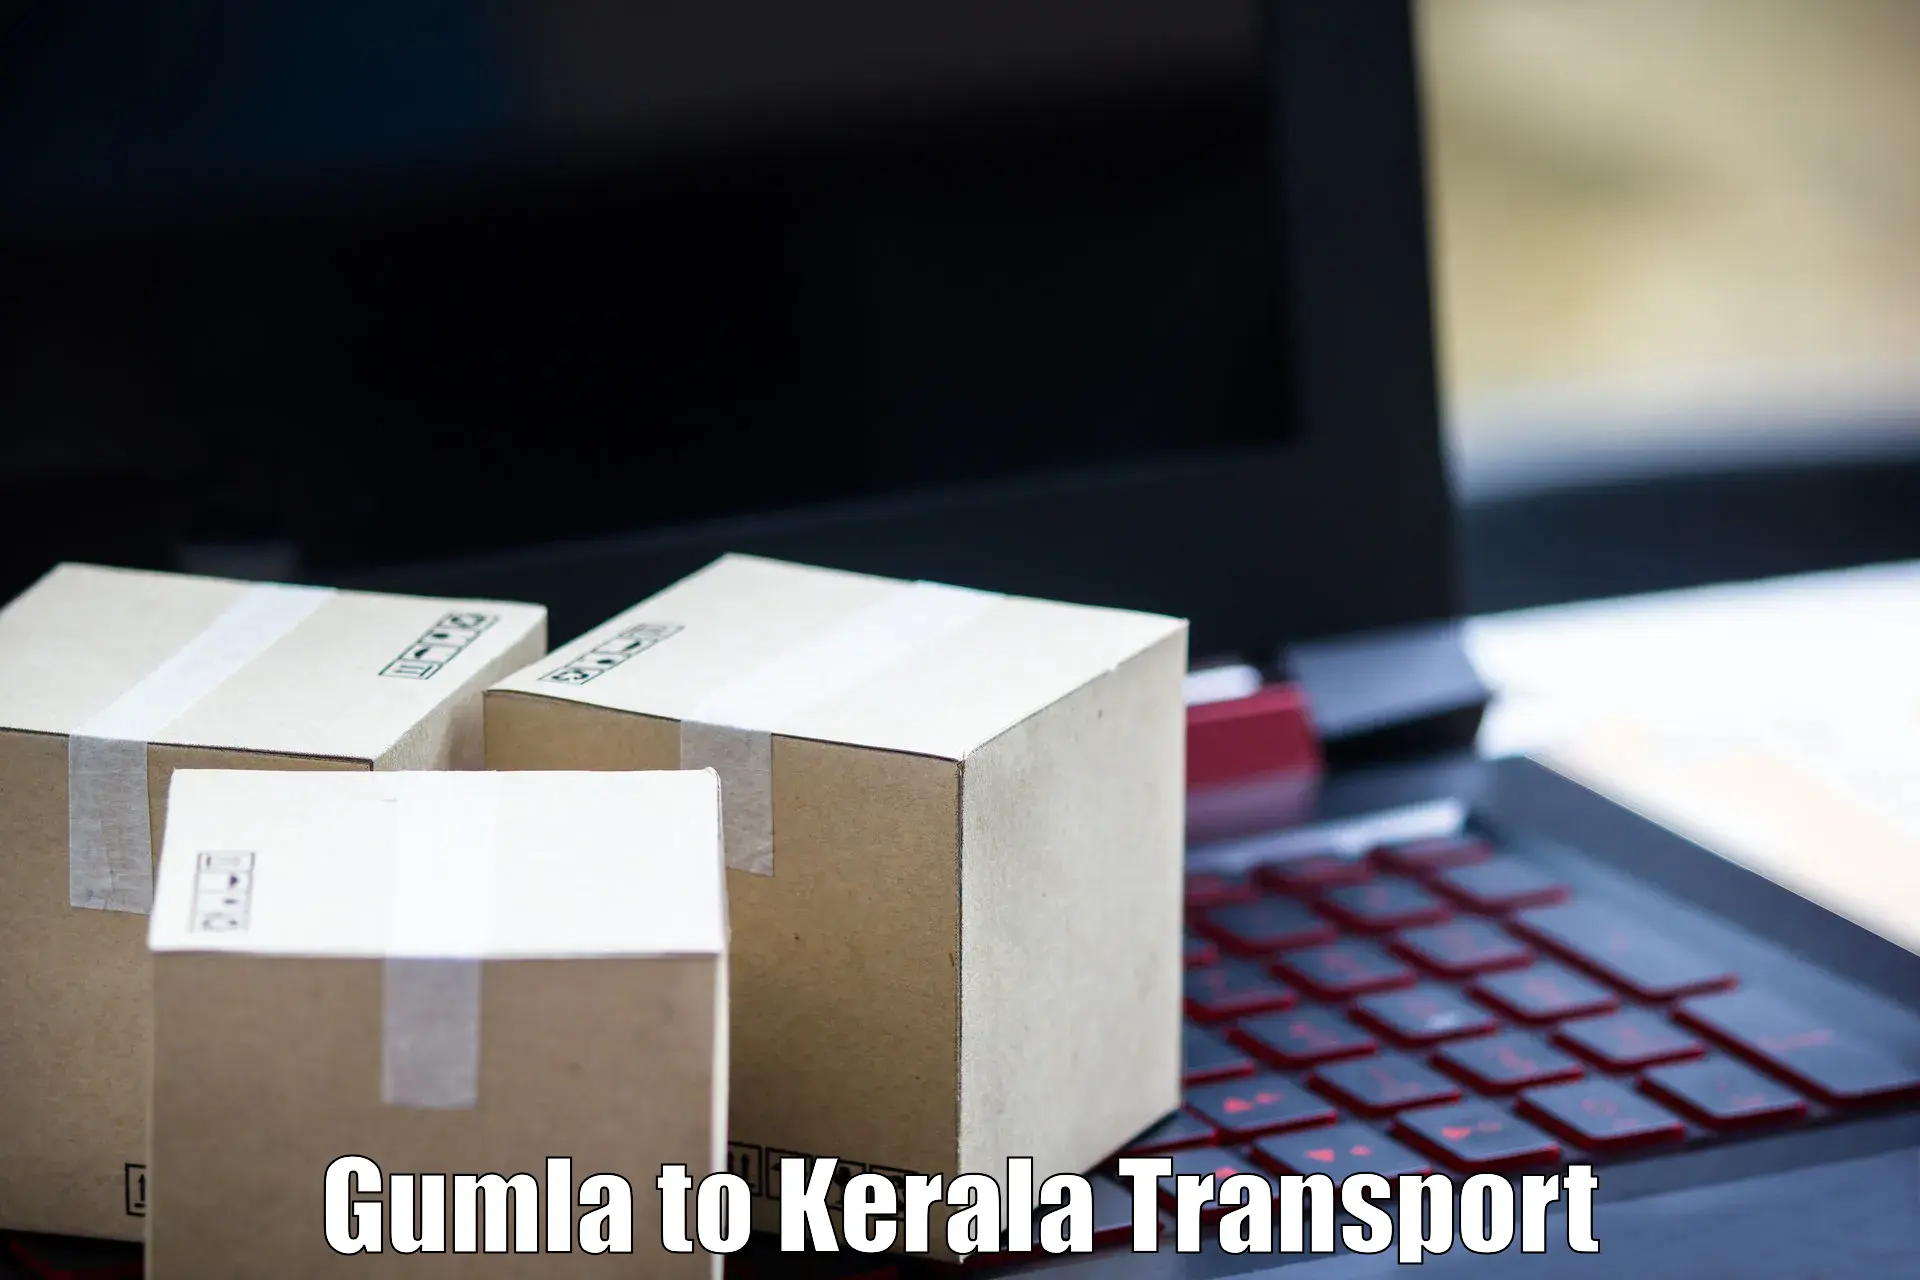 Domestic goods transportation services Gumla to Cochin University of Science and Technology